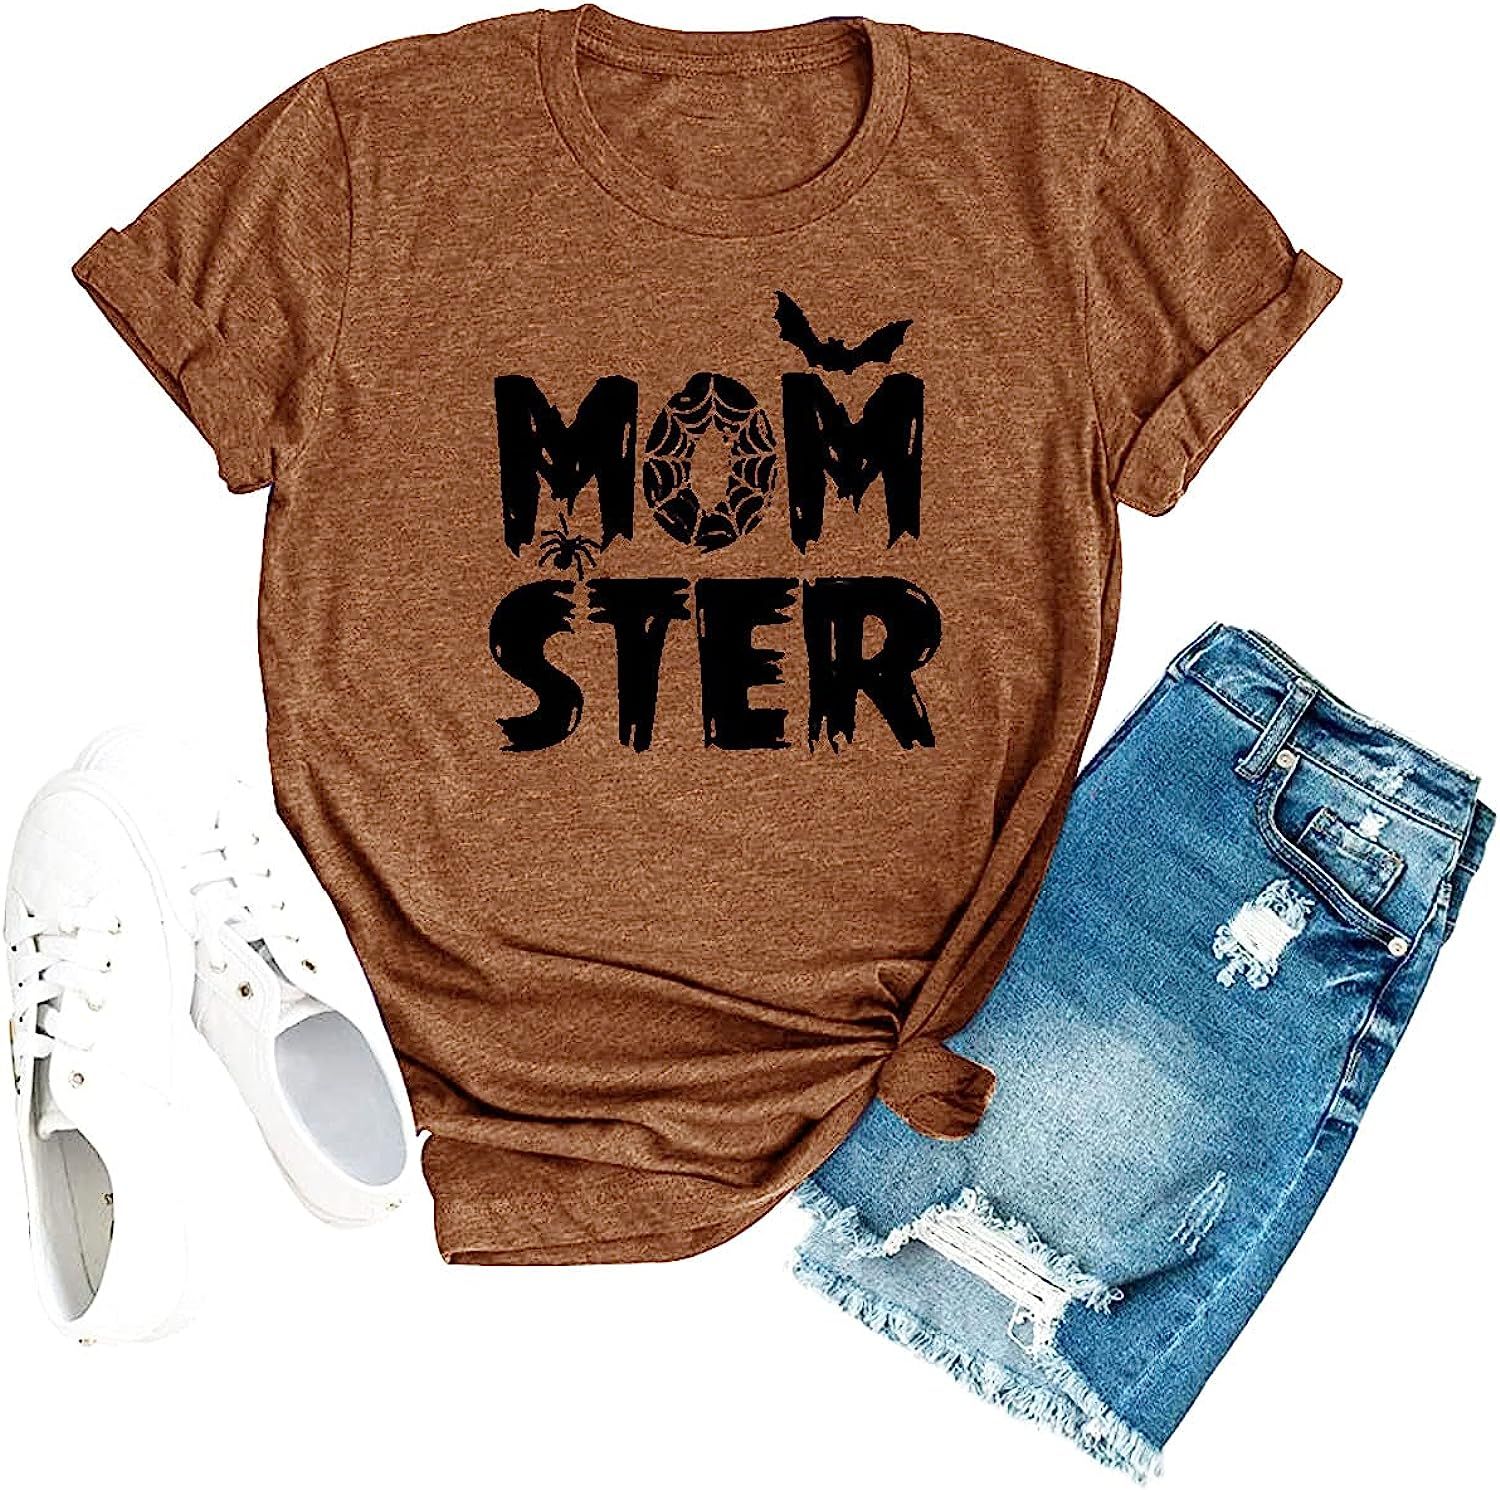 Momster T Shirt Women Funny Halloween Spider Bat Graphic Tee Casual Mom Ster Letter Print Hocus Pocu | Amazon (US)